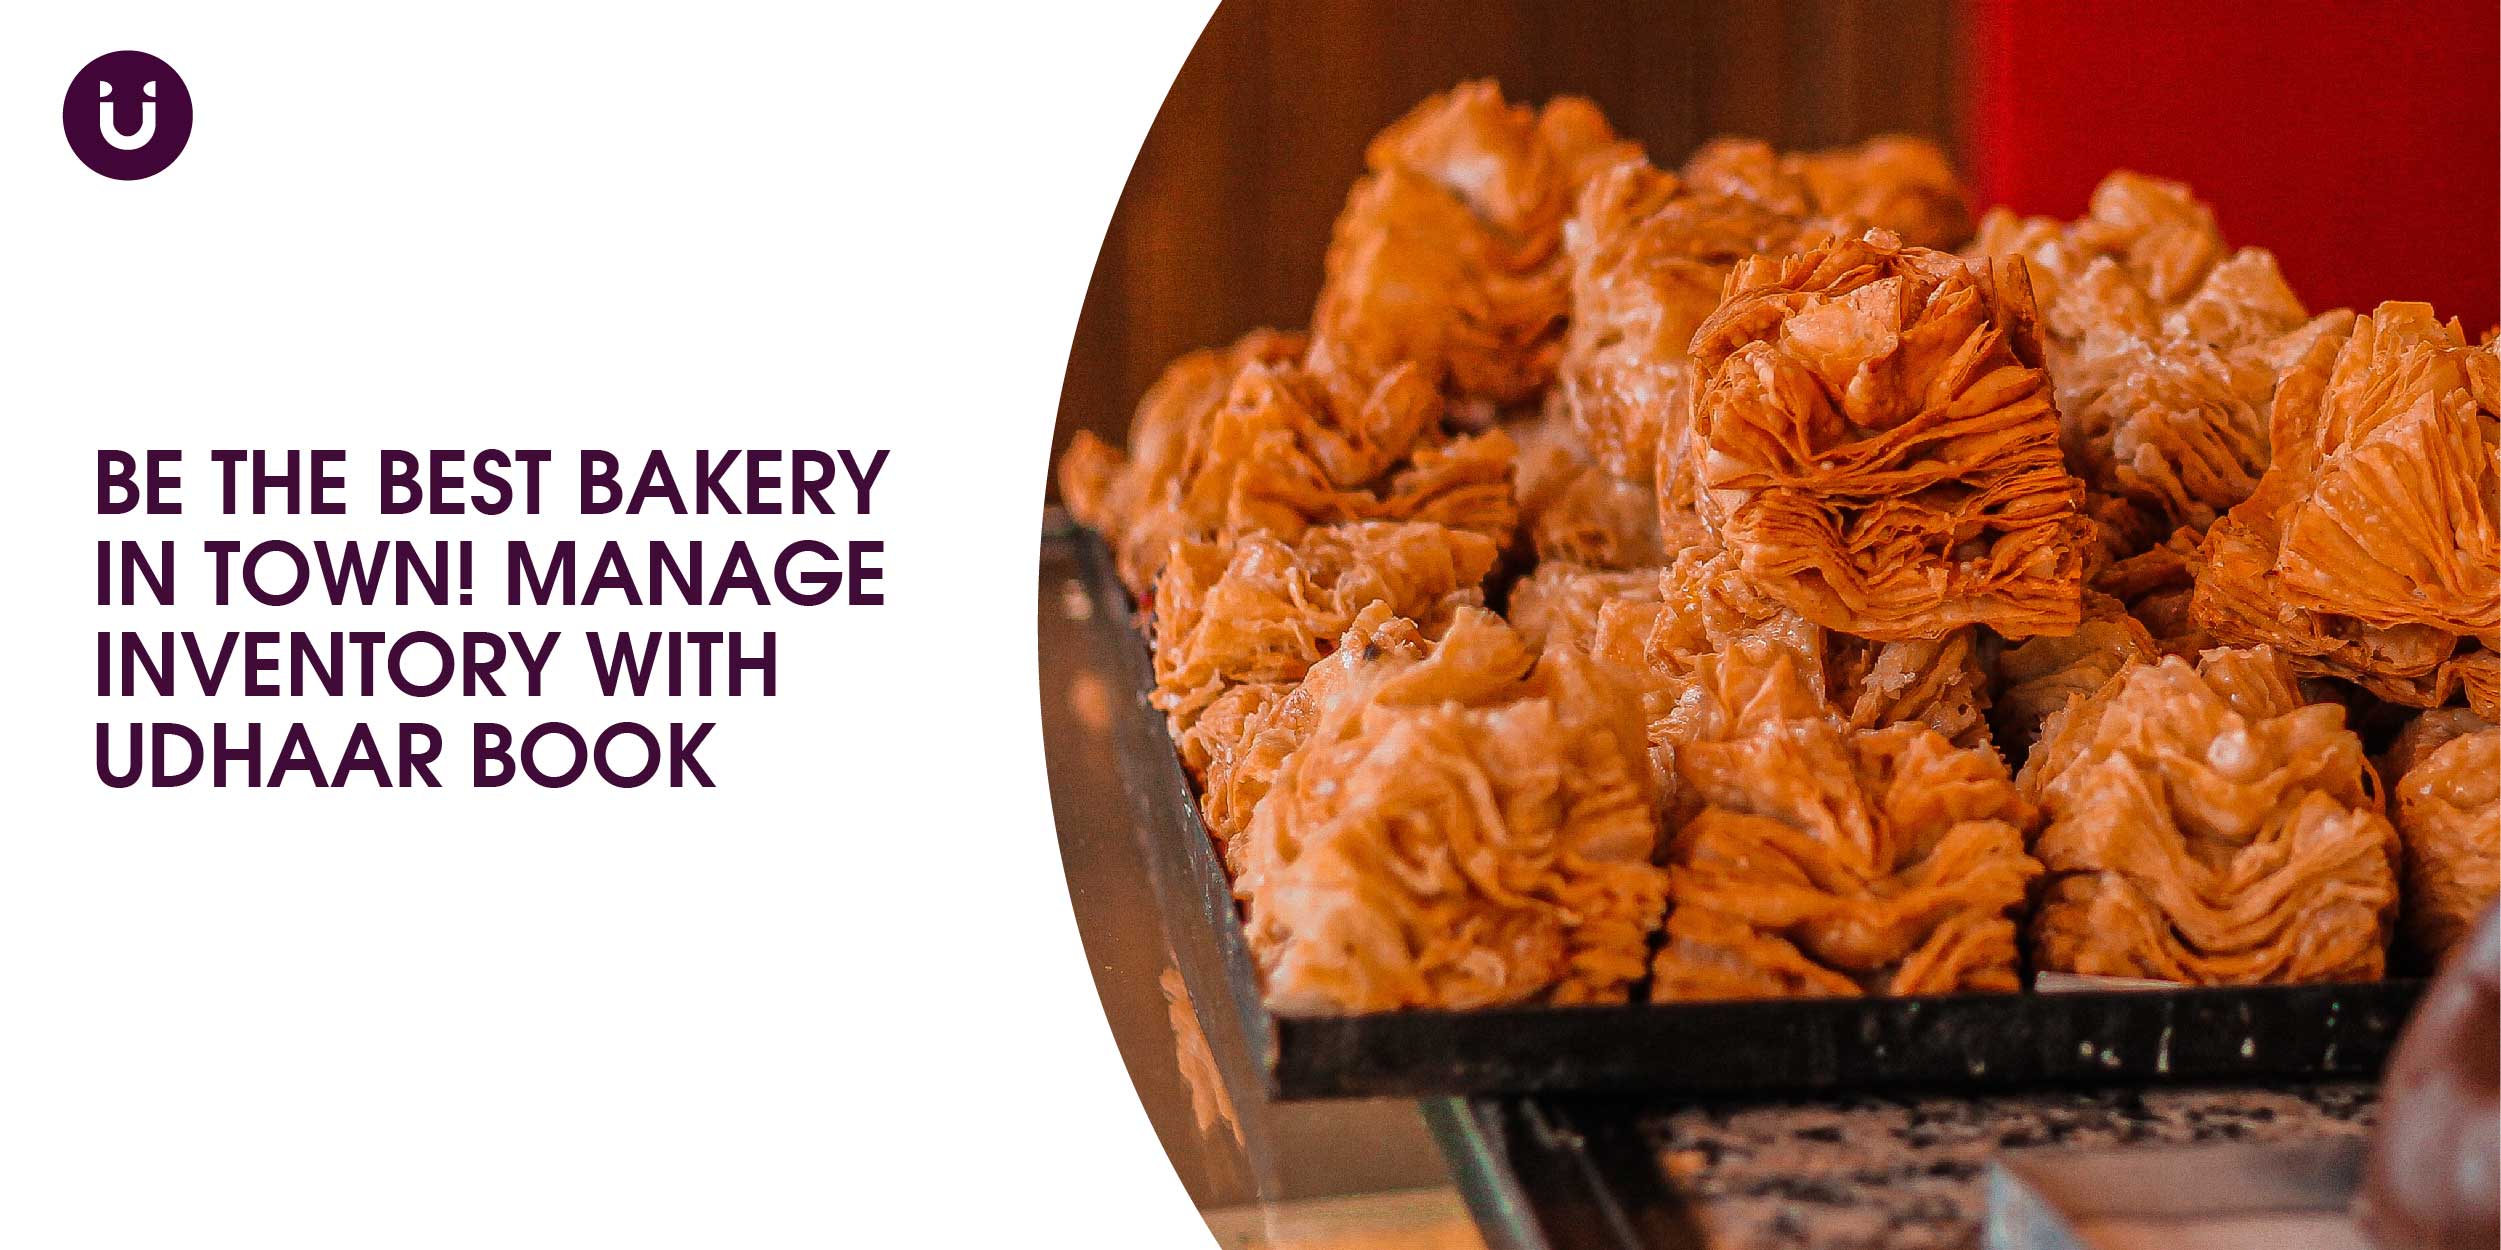 Be the Best Bakery in Town! Manage Inventory with Udhaar Book